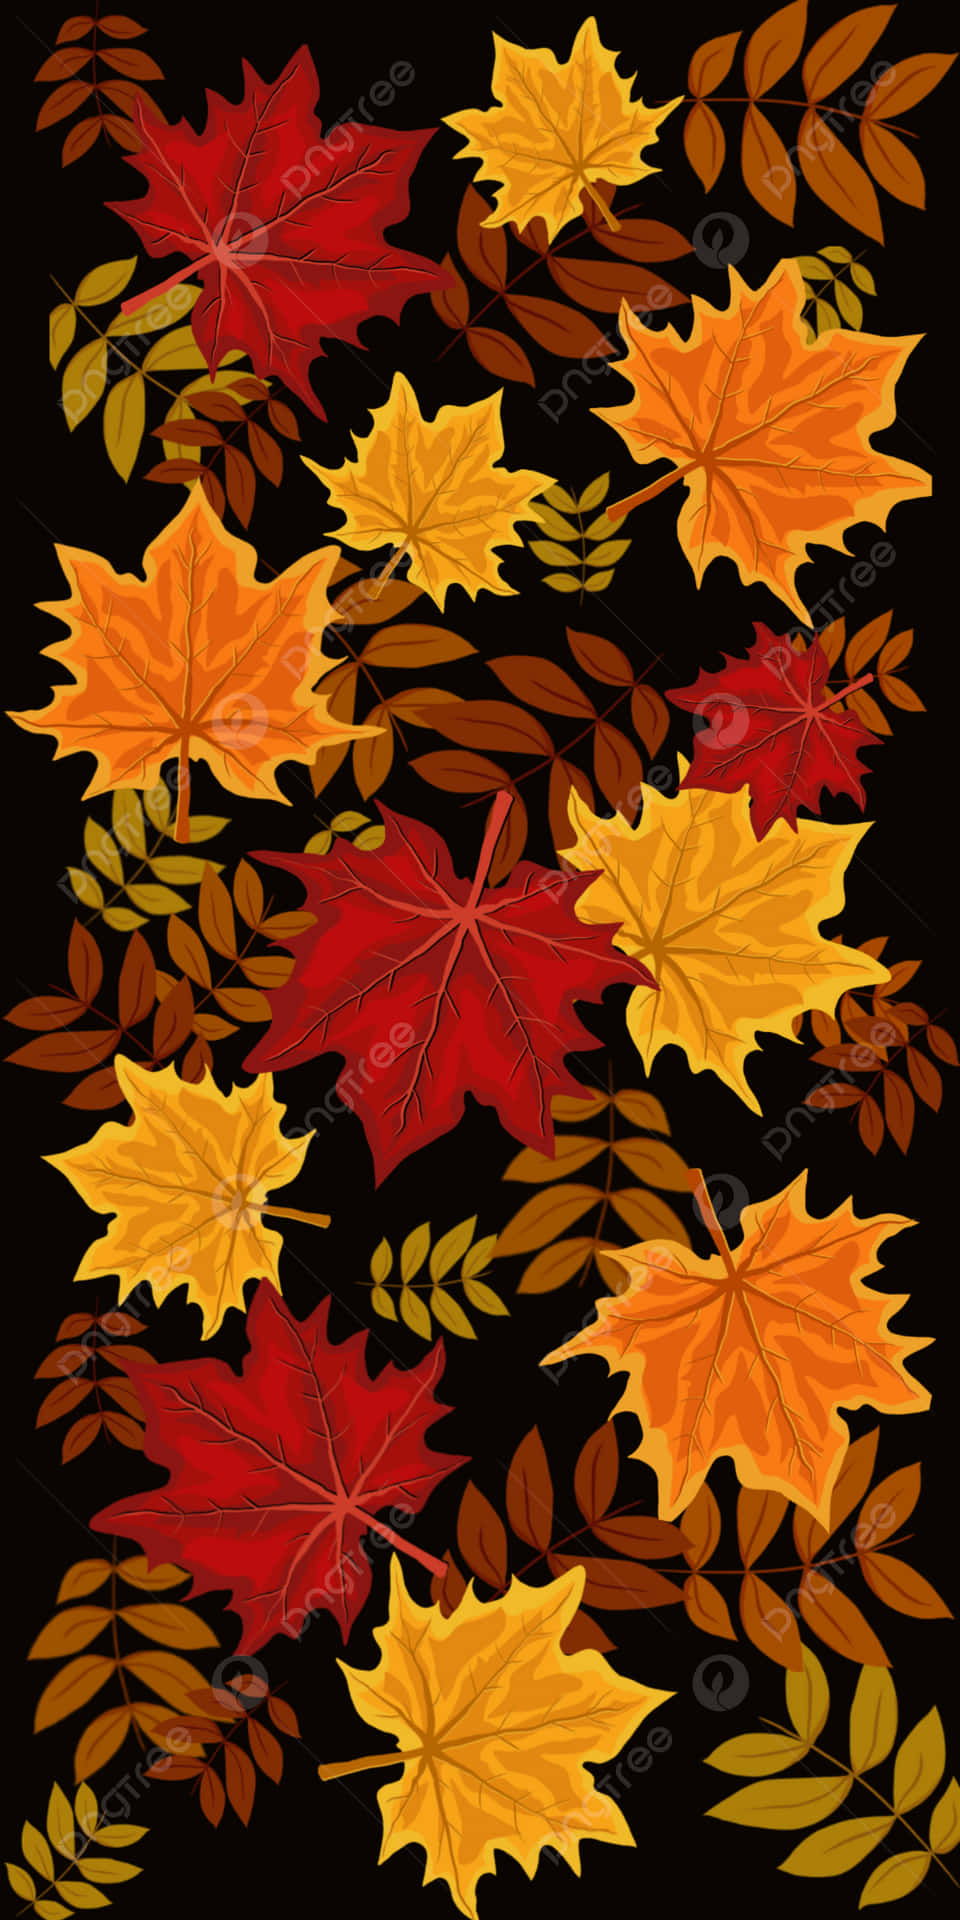 "A beautiful, vibrant red autumn leaf" Wallpaper